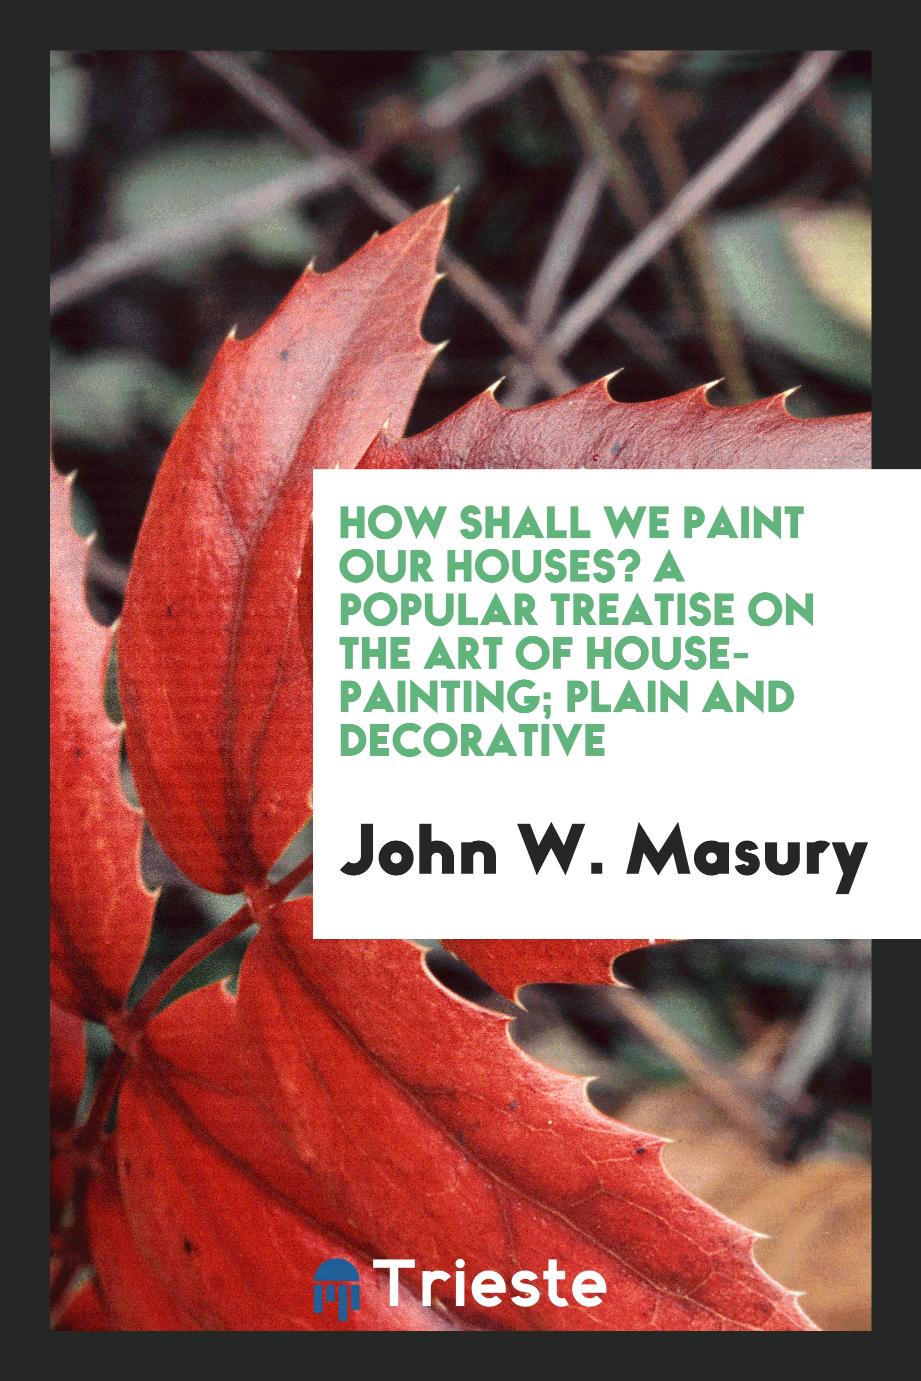 How shall we paint our houses? A popular treatise on the art of house-painting; plain and decorative